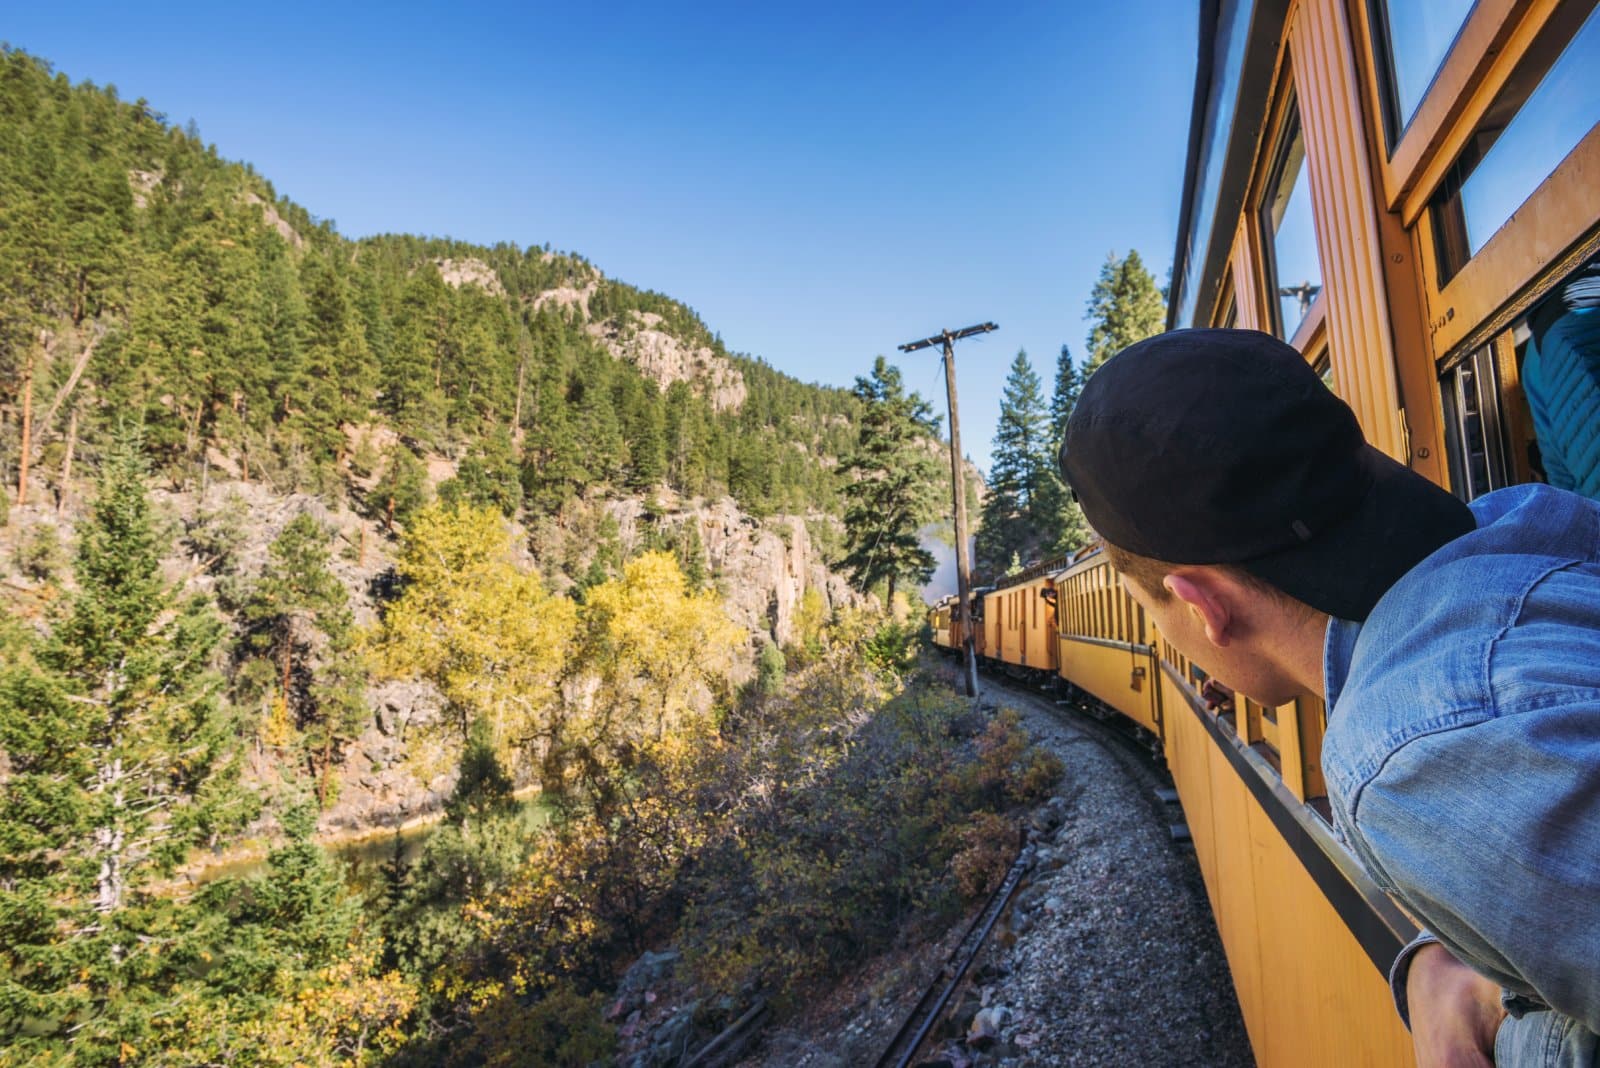 <p class="wp-caption-text">Image Credit: Shutterstock / Nick Fox</p>  <p><span>This spring, Colorado invites you to step outside the ordinary and into a world brimming with adventure, culture, and natural wonders, all with a backdrop of the Rocky Mountains coming to life. Whether cruising down Aspen slopes or sipping Palisade wines, the perfect spring break awaits in Colorado.</span></p>